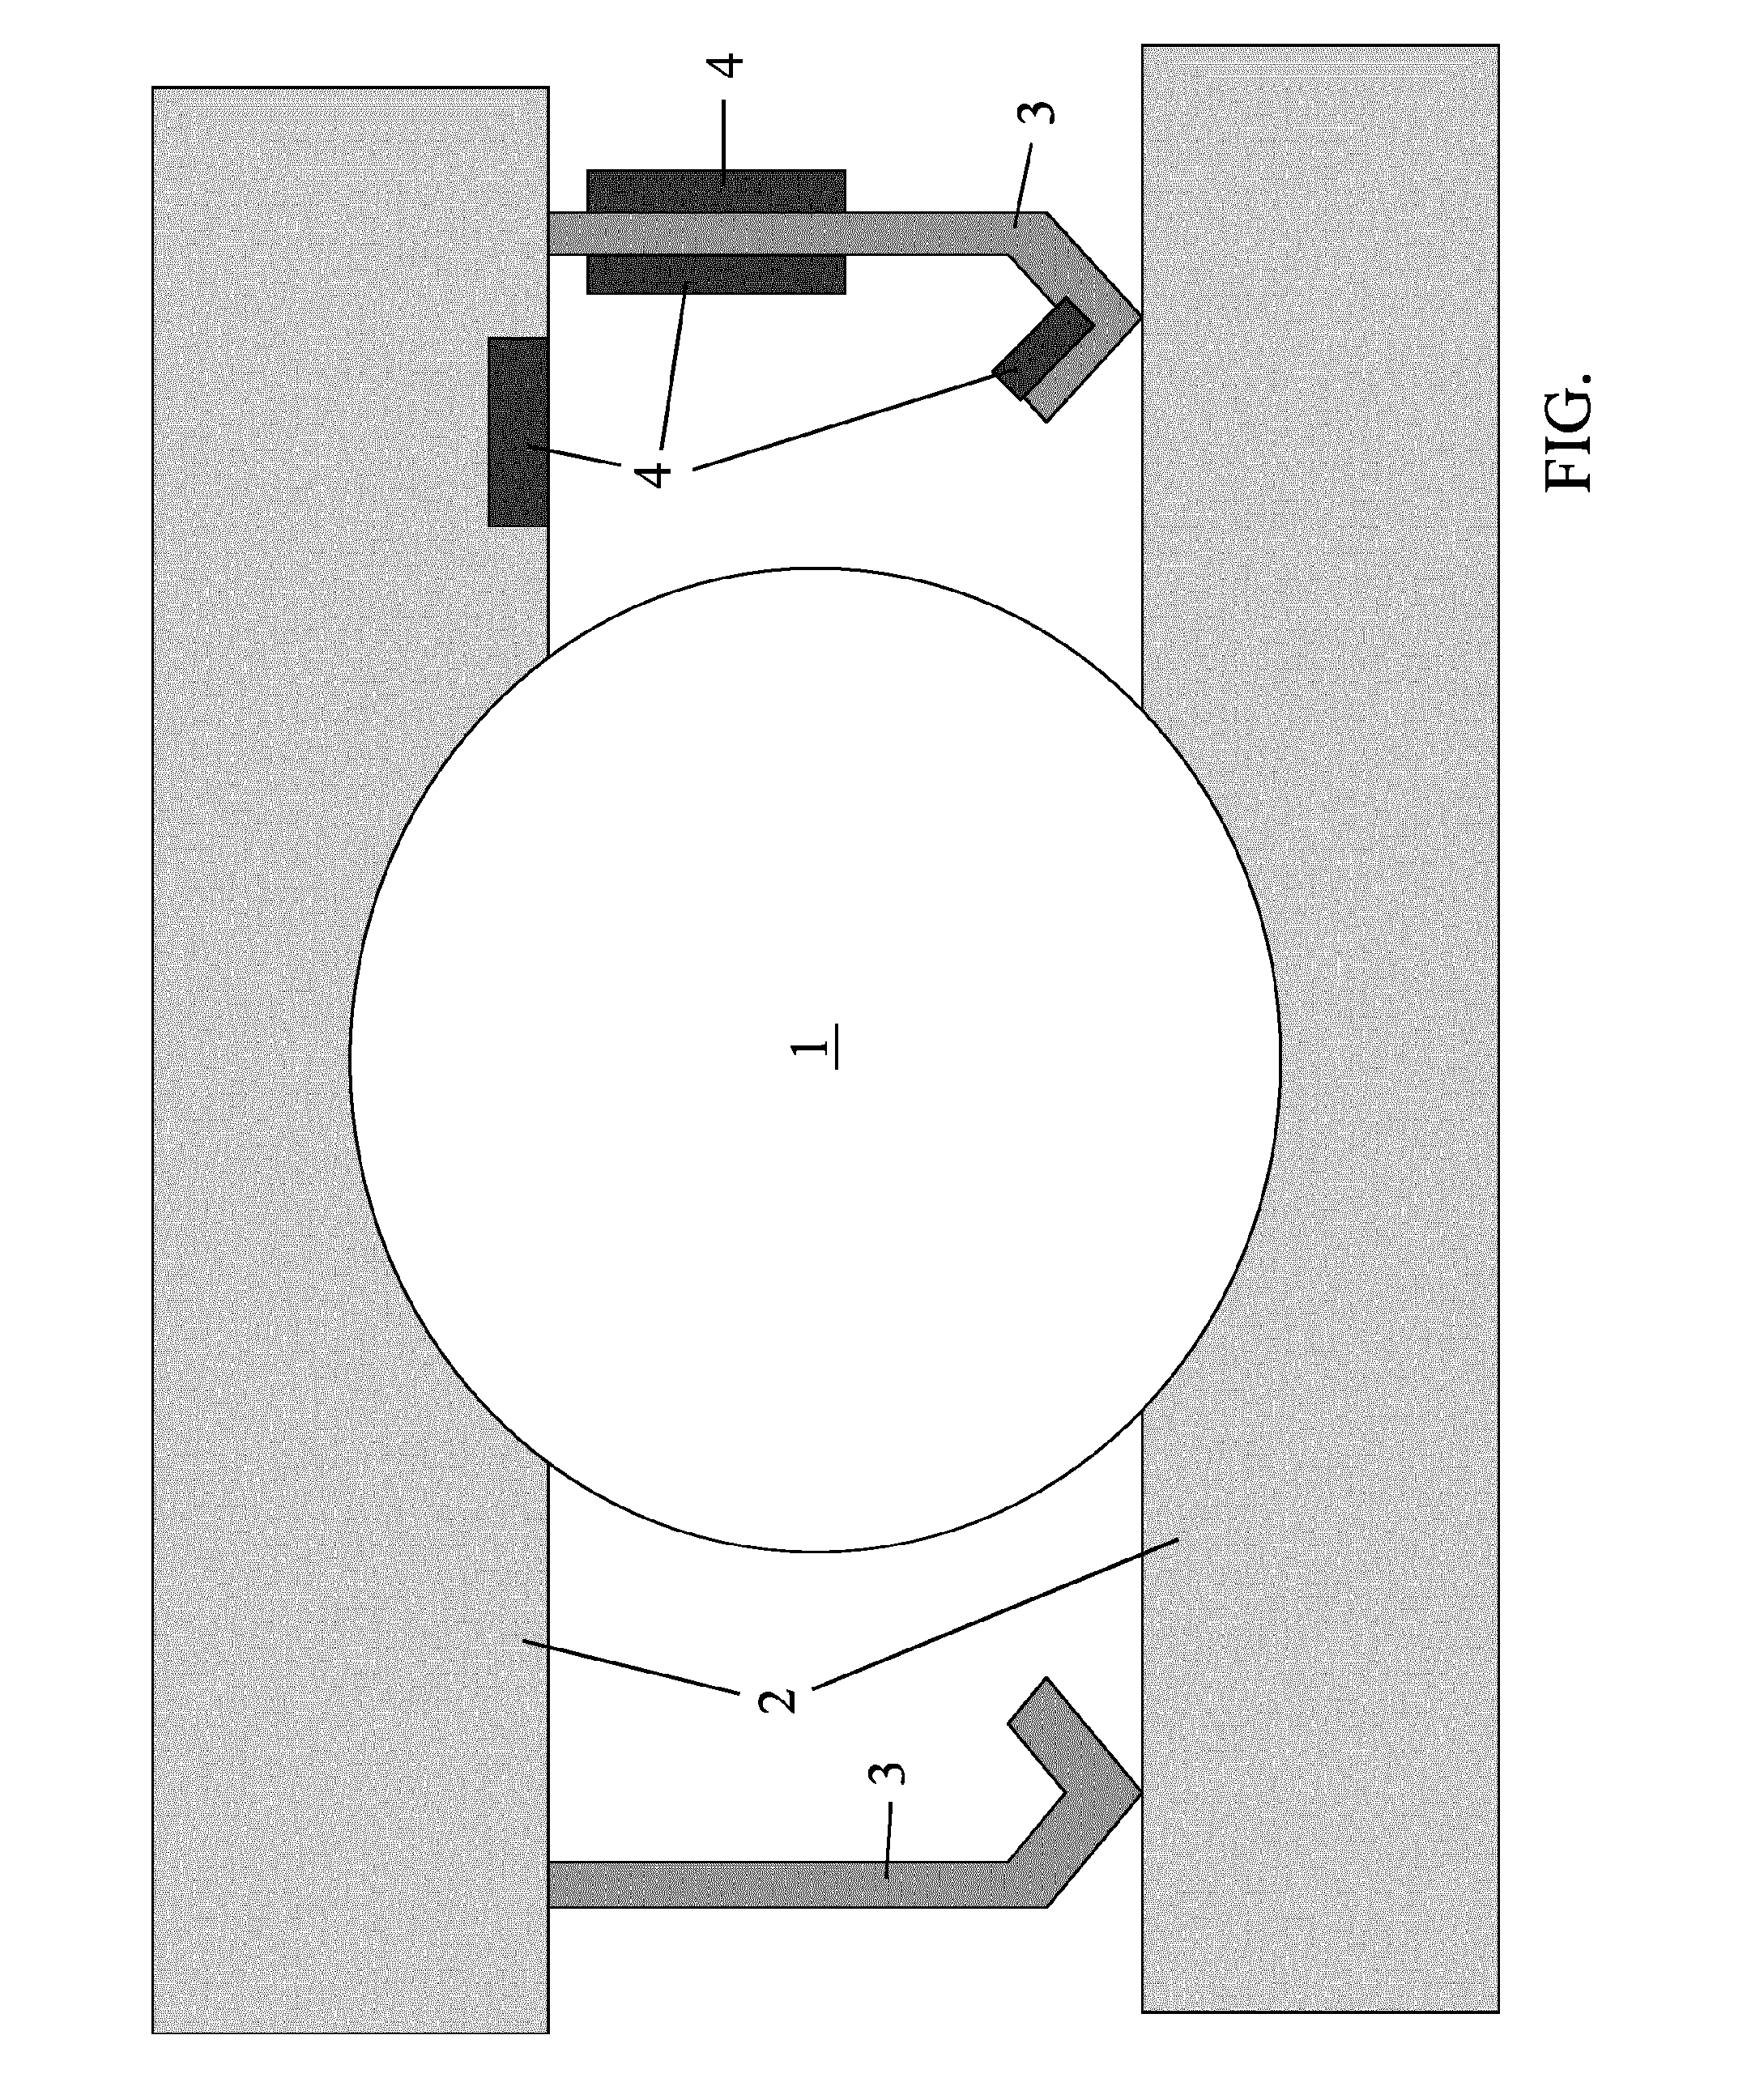 Hydrophilic composition for use with a lubricating system as well as an apparatus and method for using the same